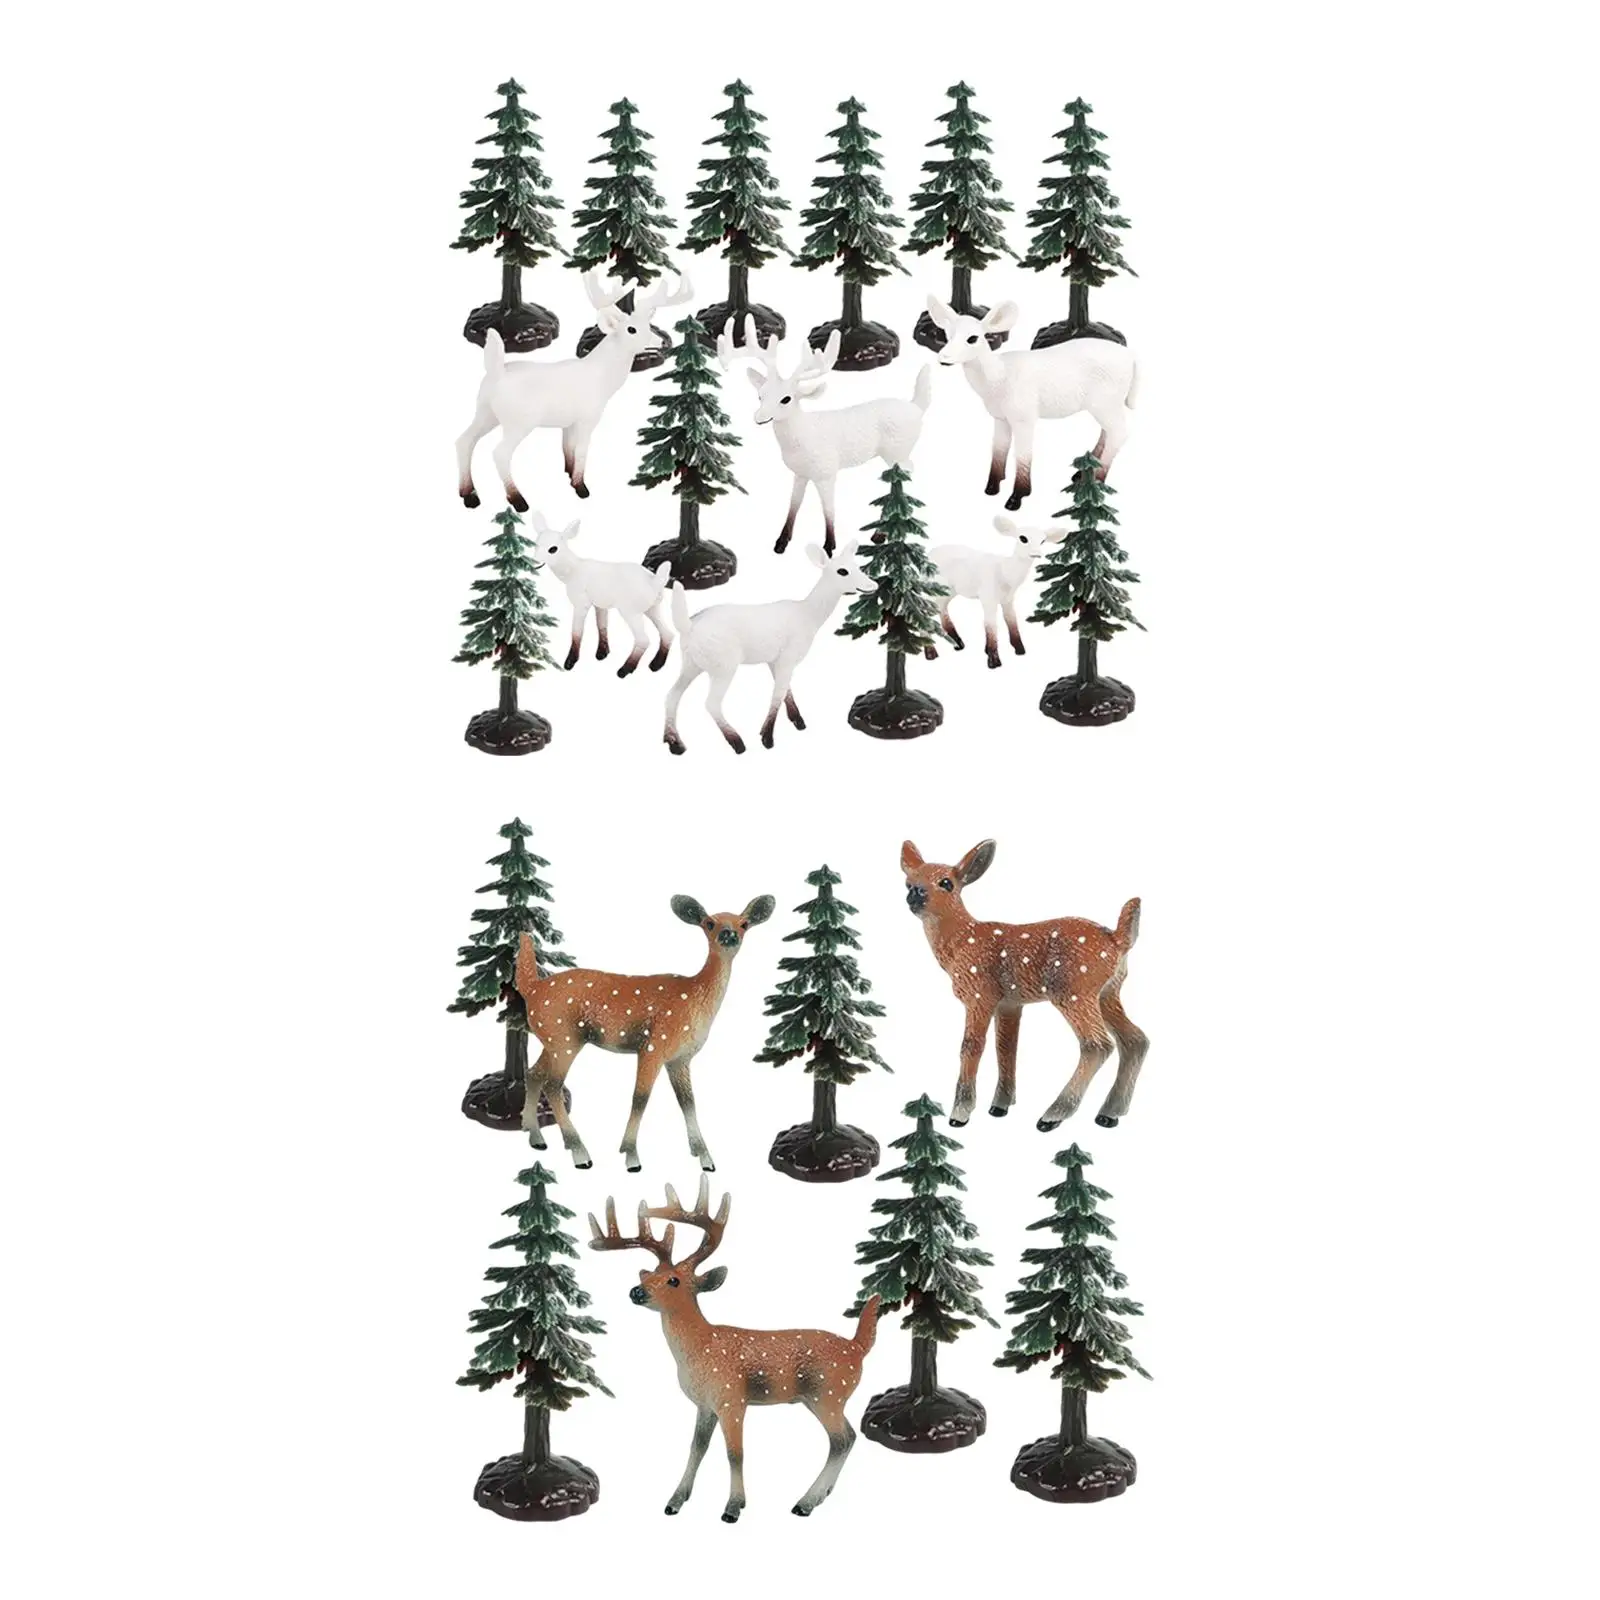 Tree Deer Figures Accessories Forest Animal Toys for Diorama Home Birthday Toddlers